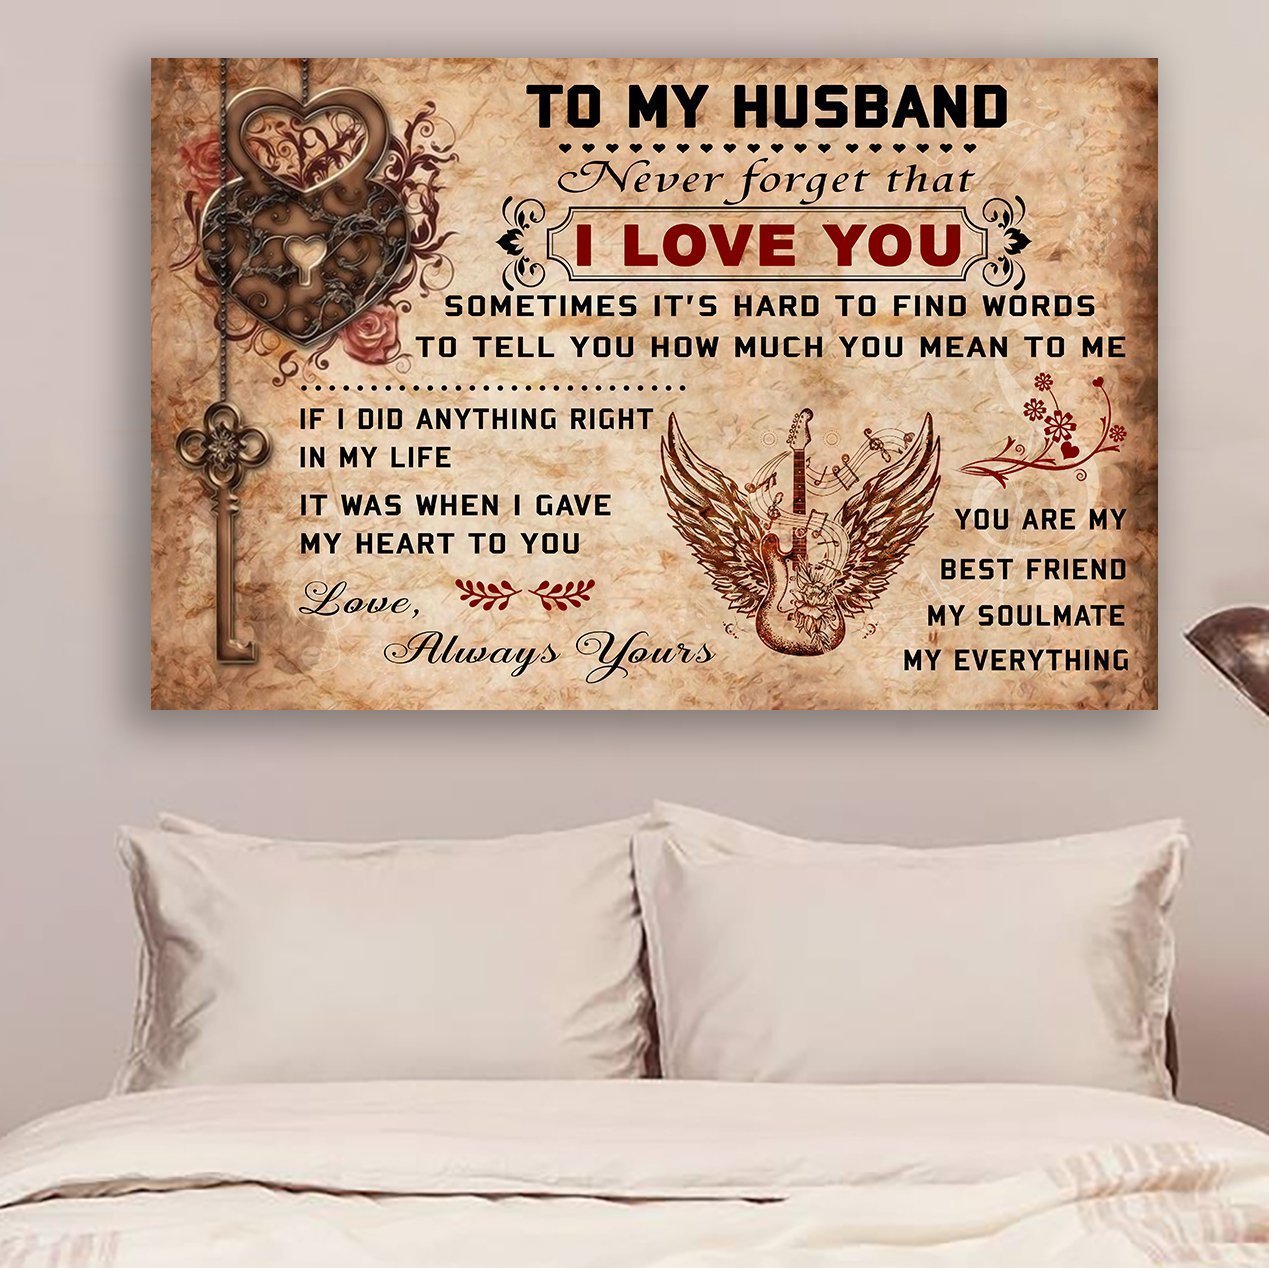 Guitar Canvas and Poster ��� Wife to husband ��� I love you wall decor visual art - GIFTCUSTOM